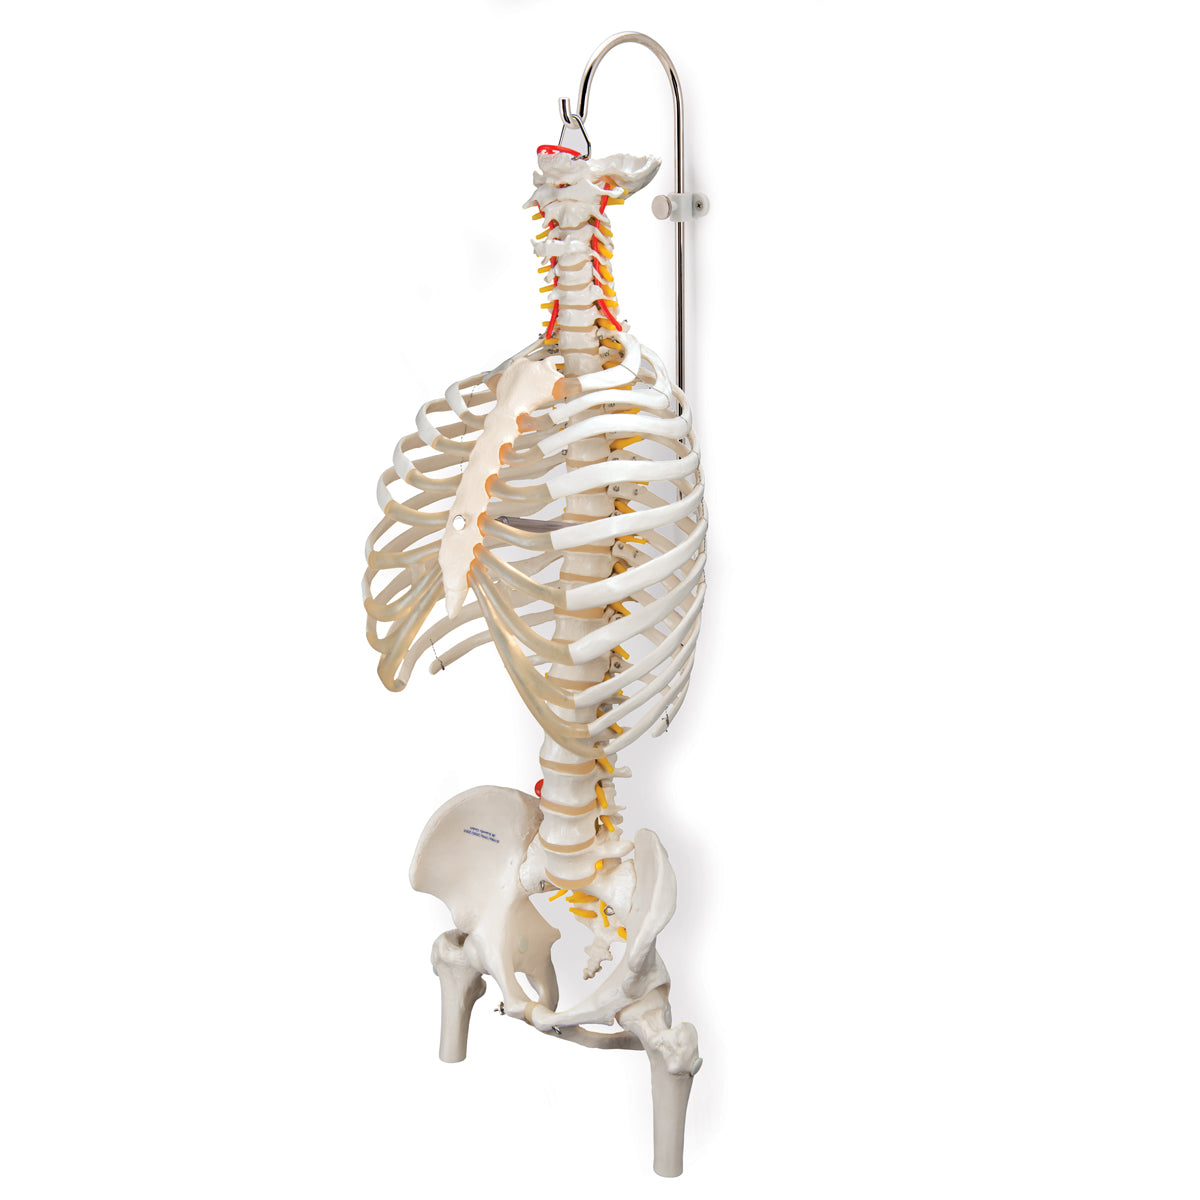 Stand for model of spine. Can be placed on both the floor and table or mounted on the wall